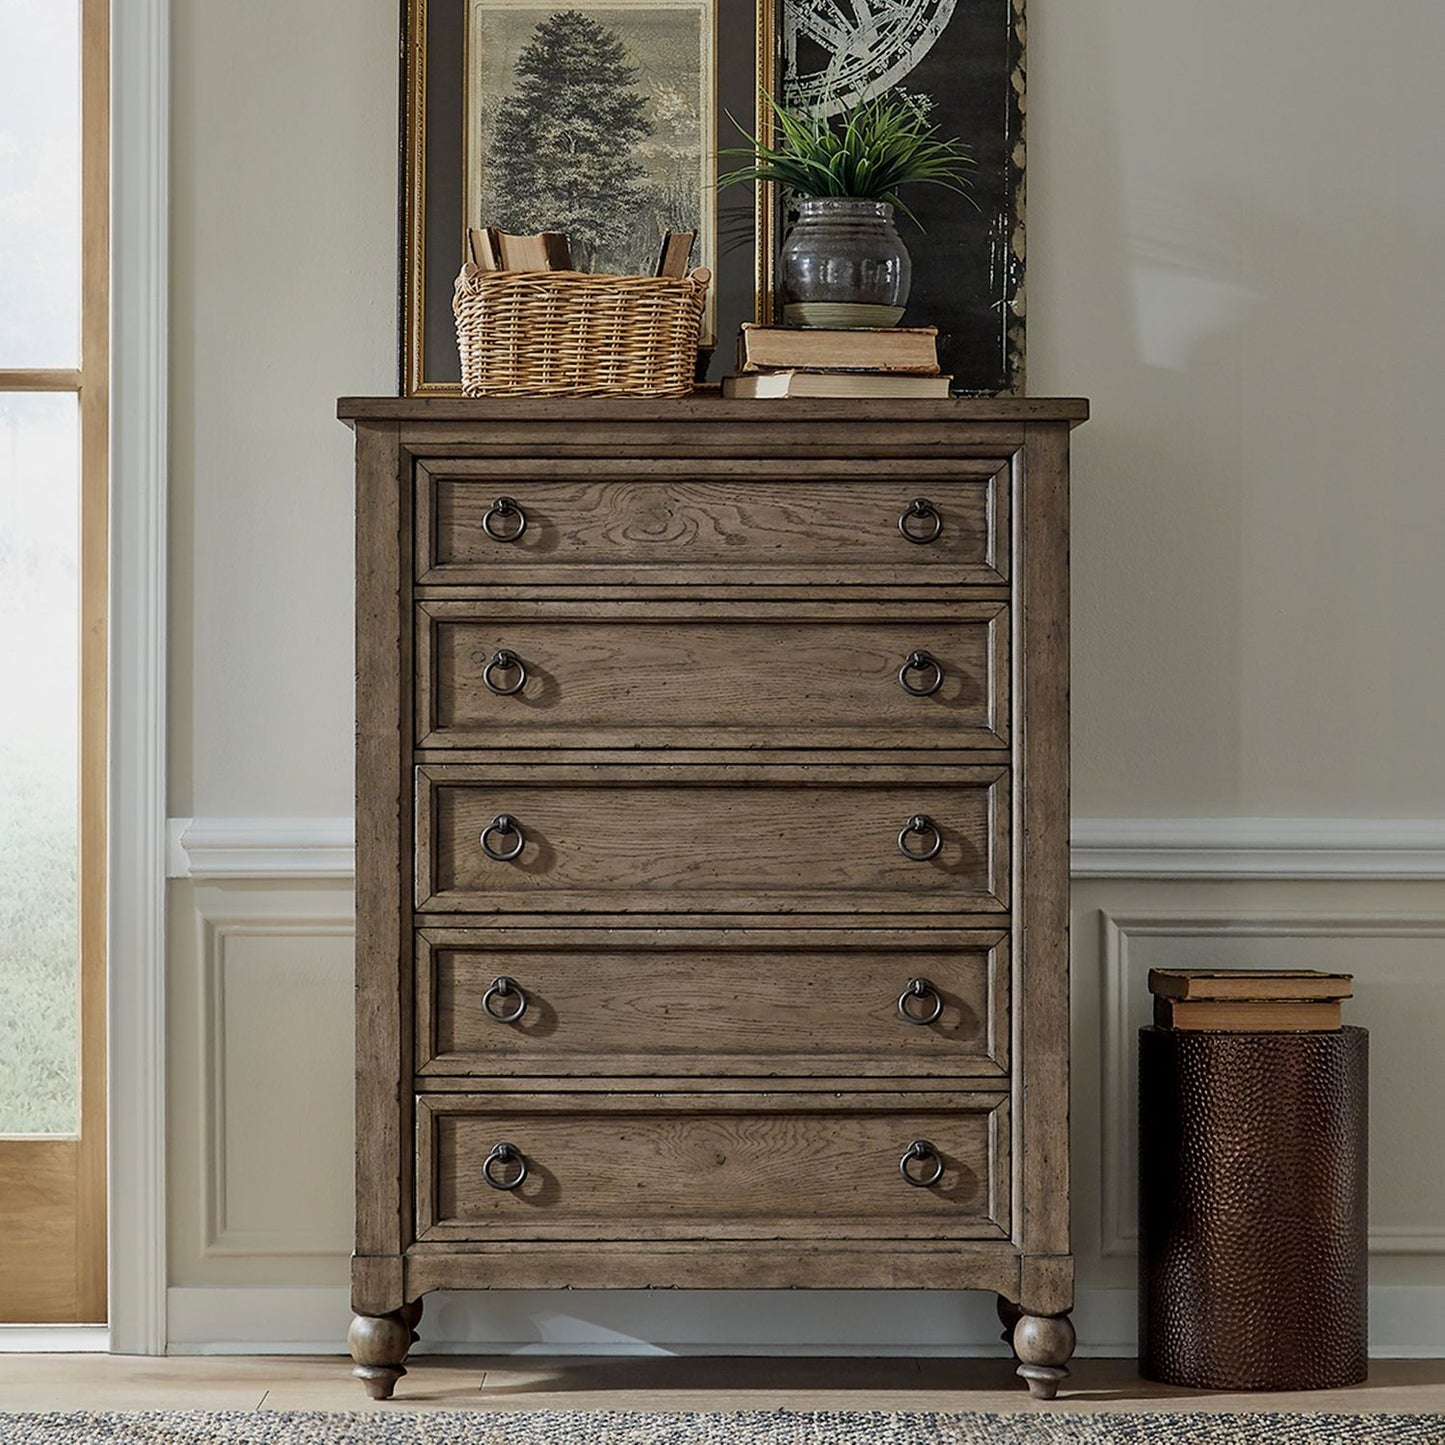 Rustic Traditions - 5 Drawer Chest